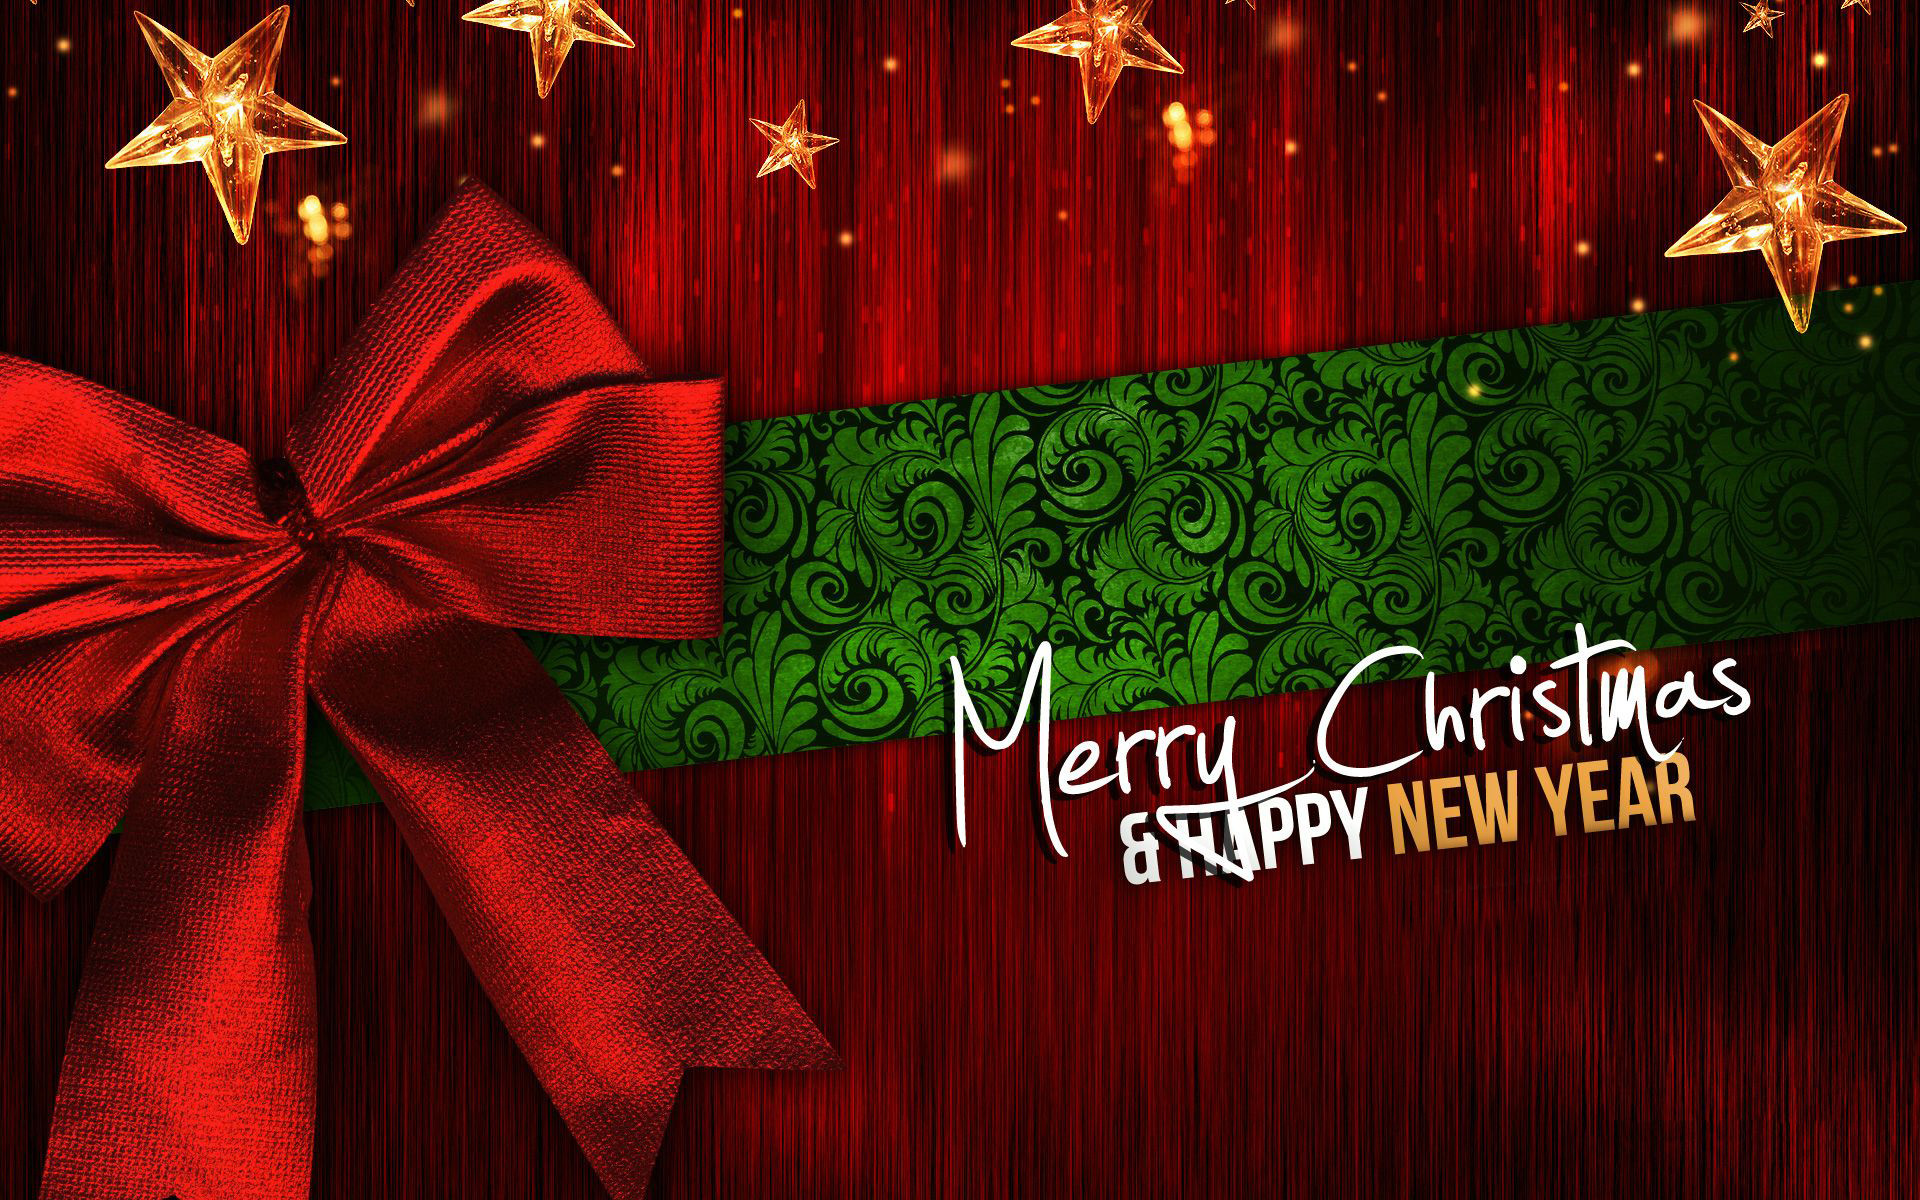 Merry Christmas and Happy New Year HD Wallpapers